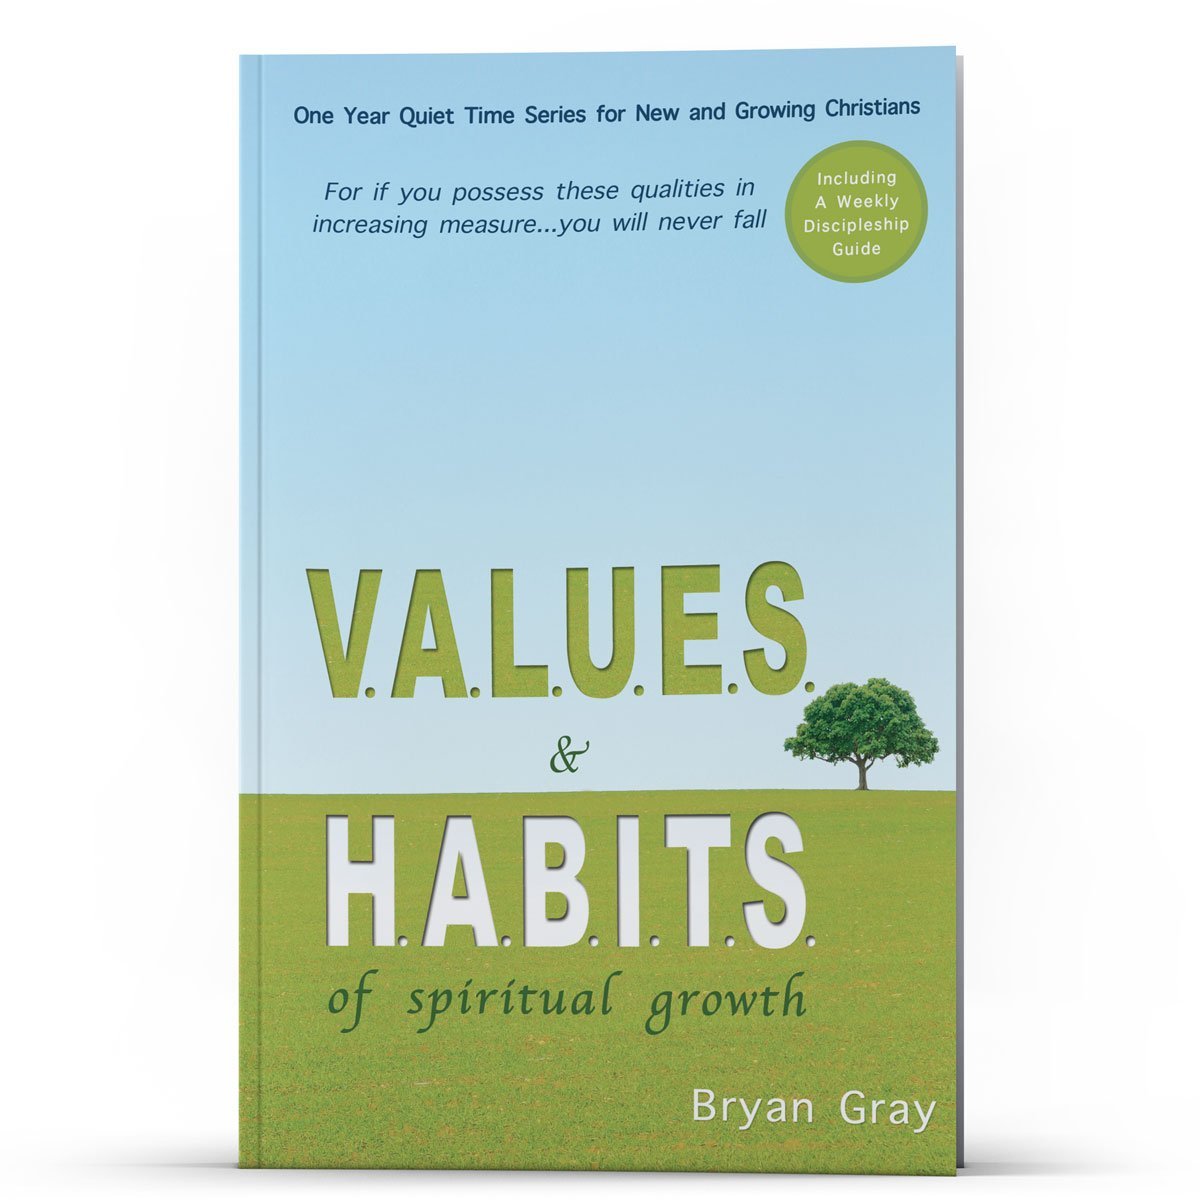 VALUES and HABITS One Year Quiet Time Series - Illumination Publishers